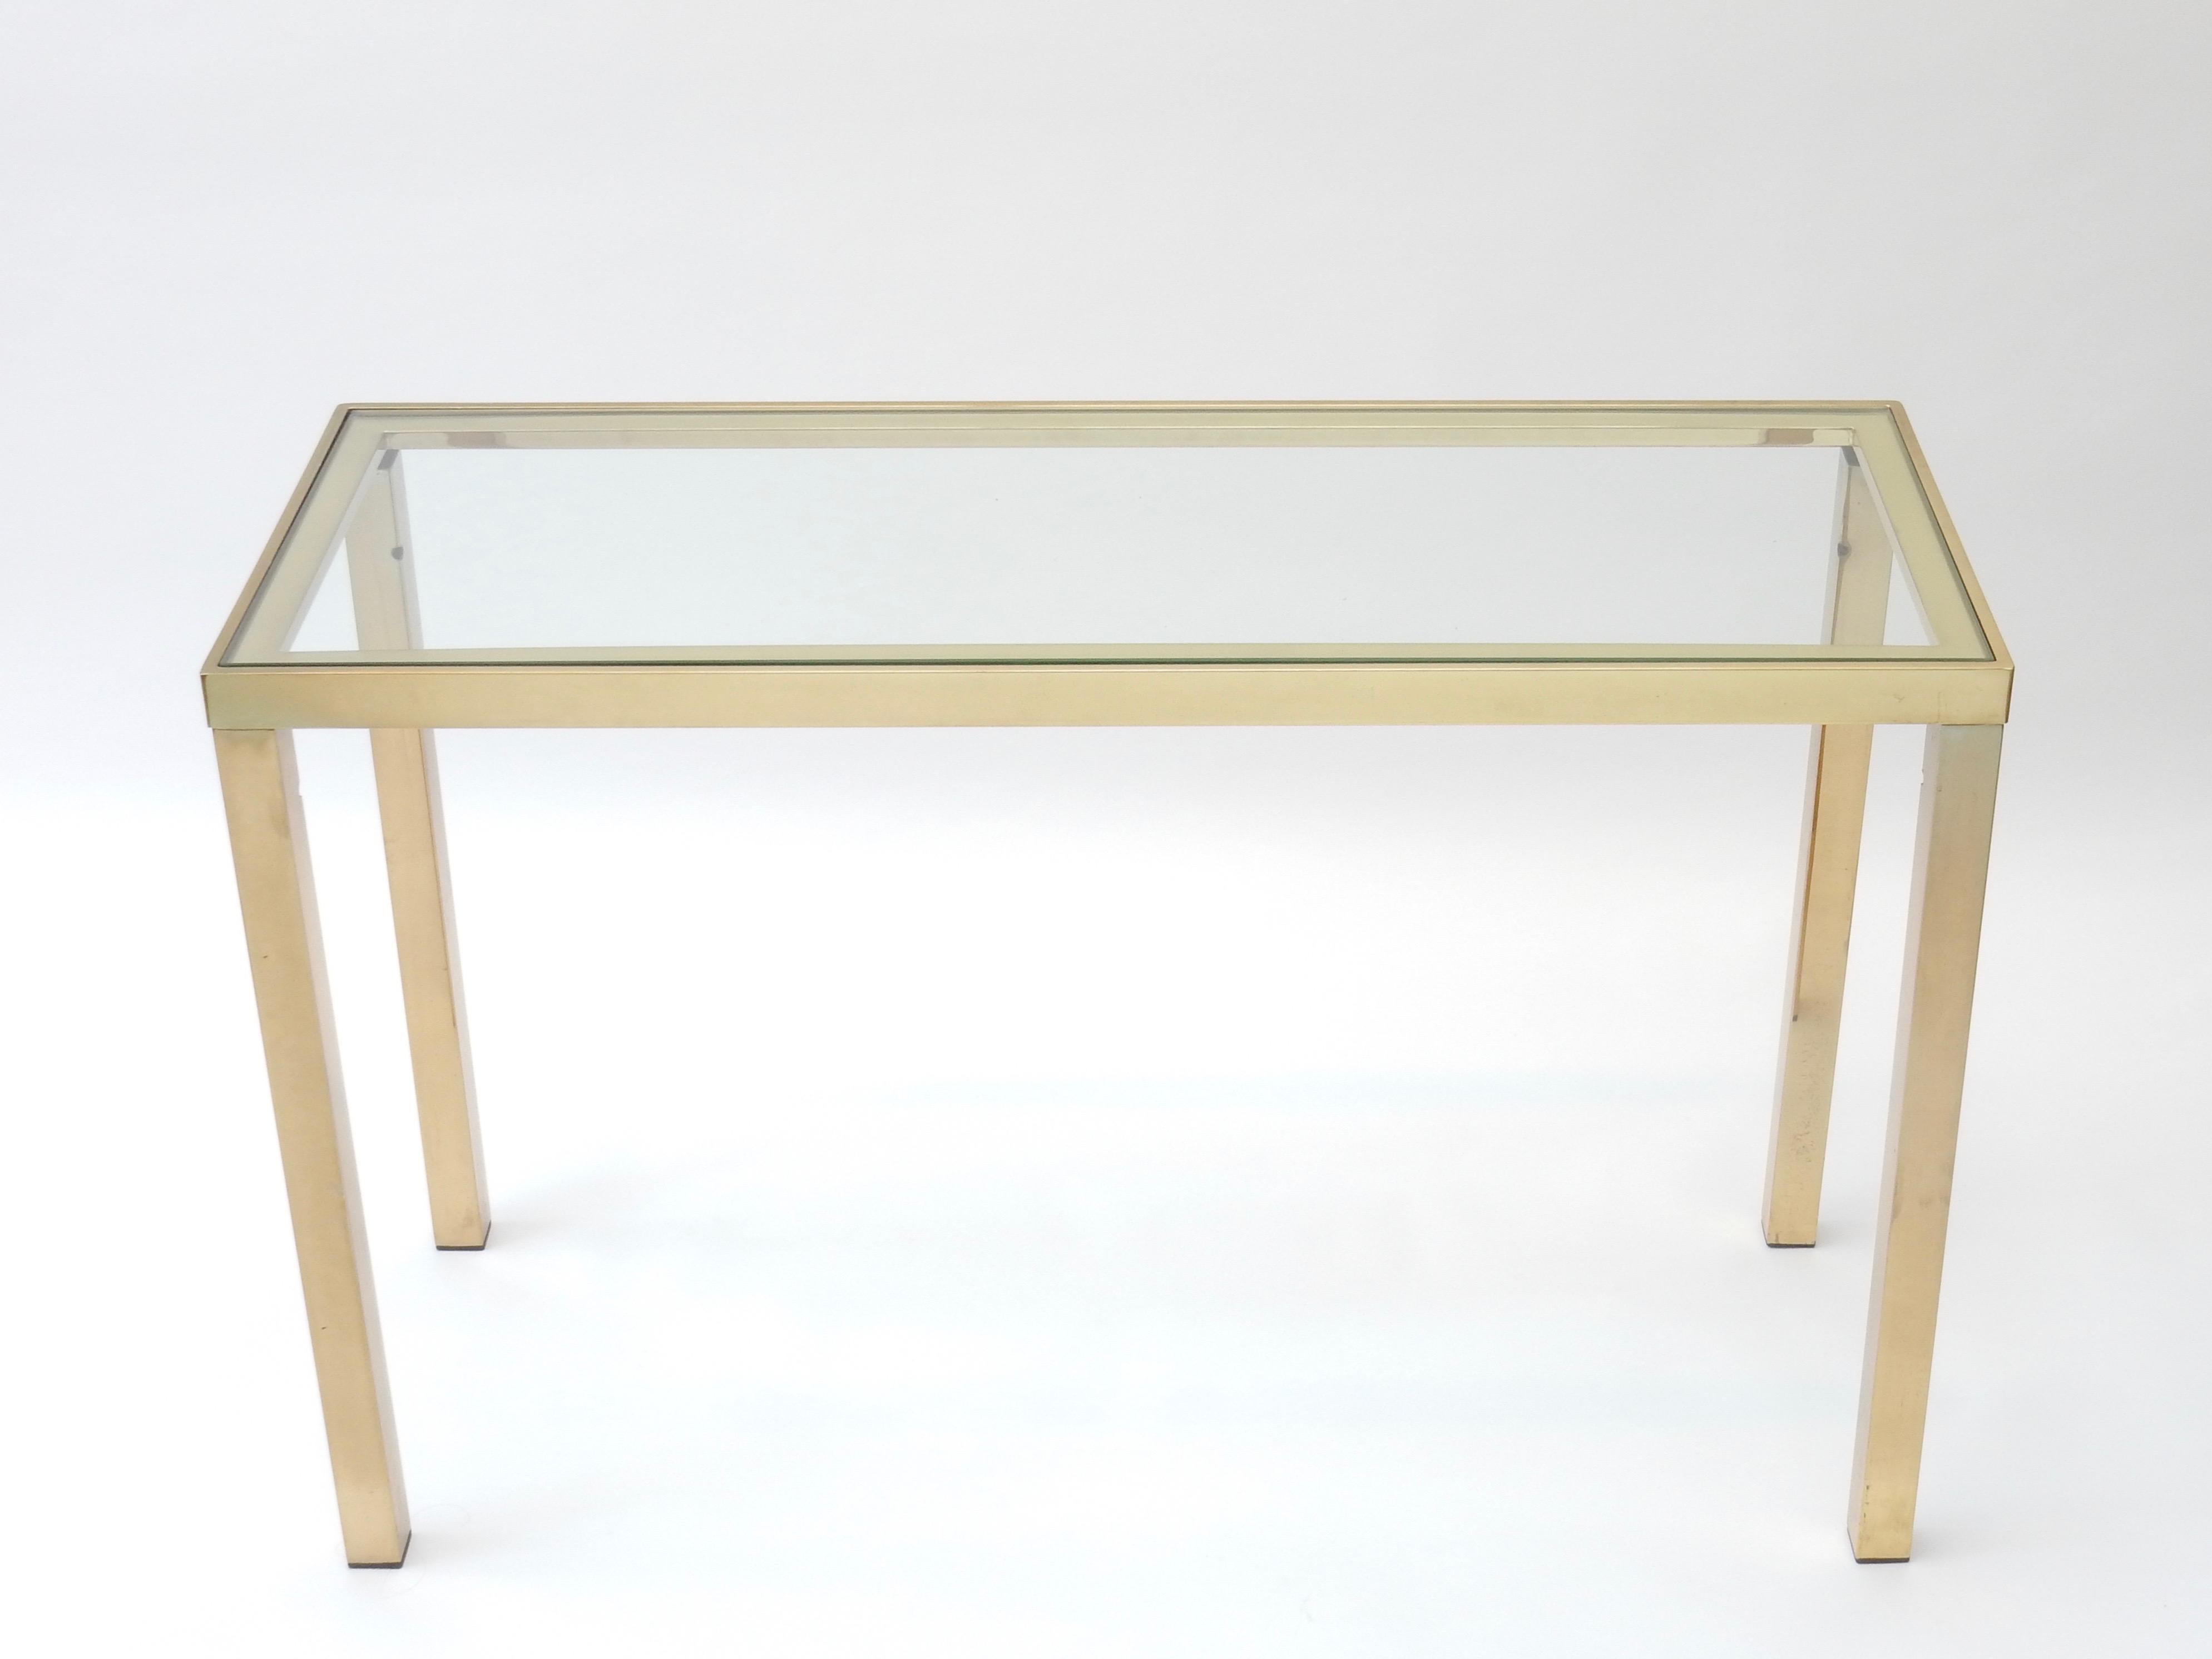 French brass console table with glass top, 1970s.